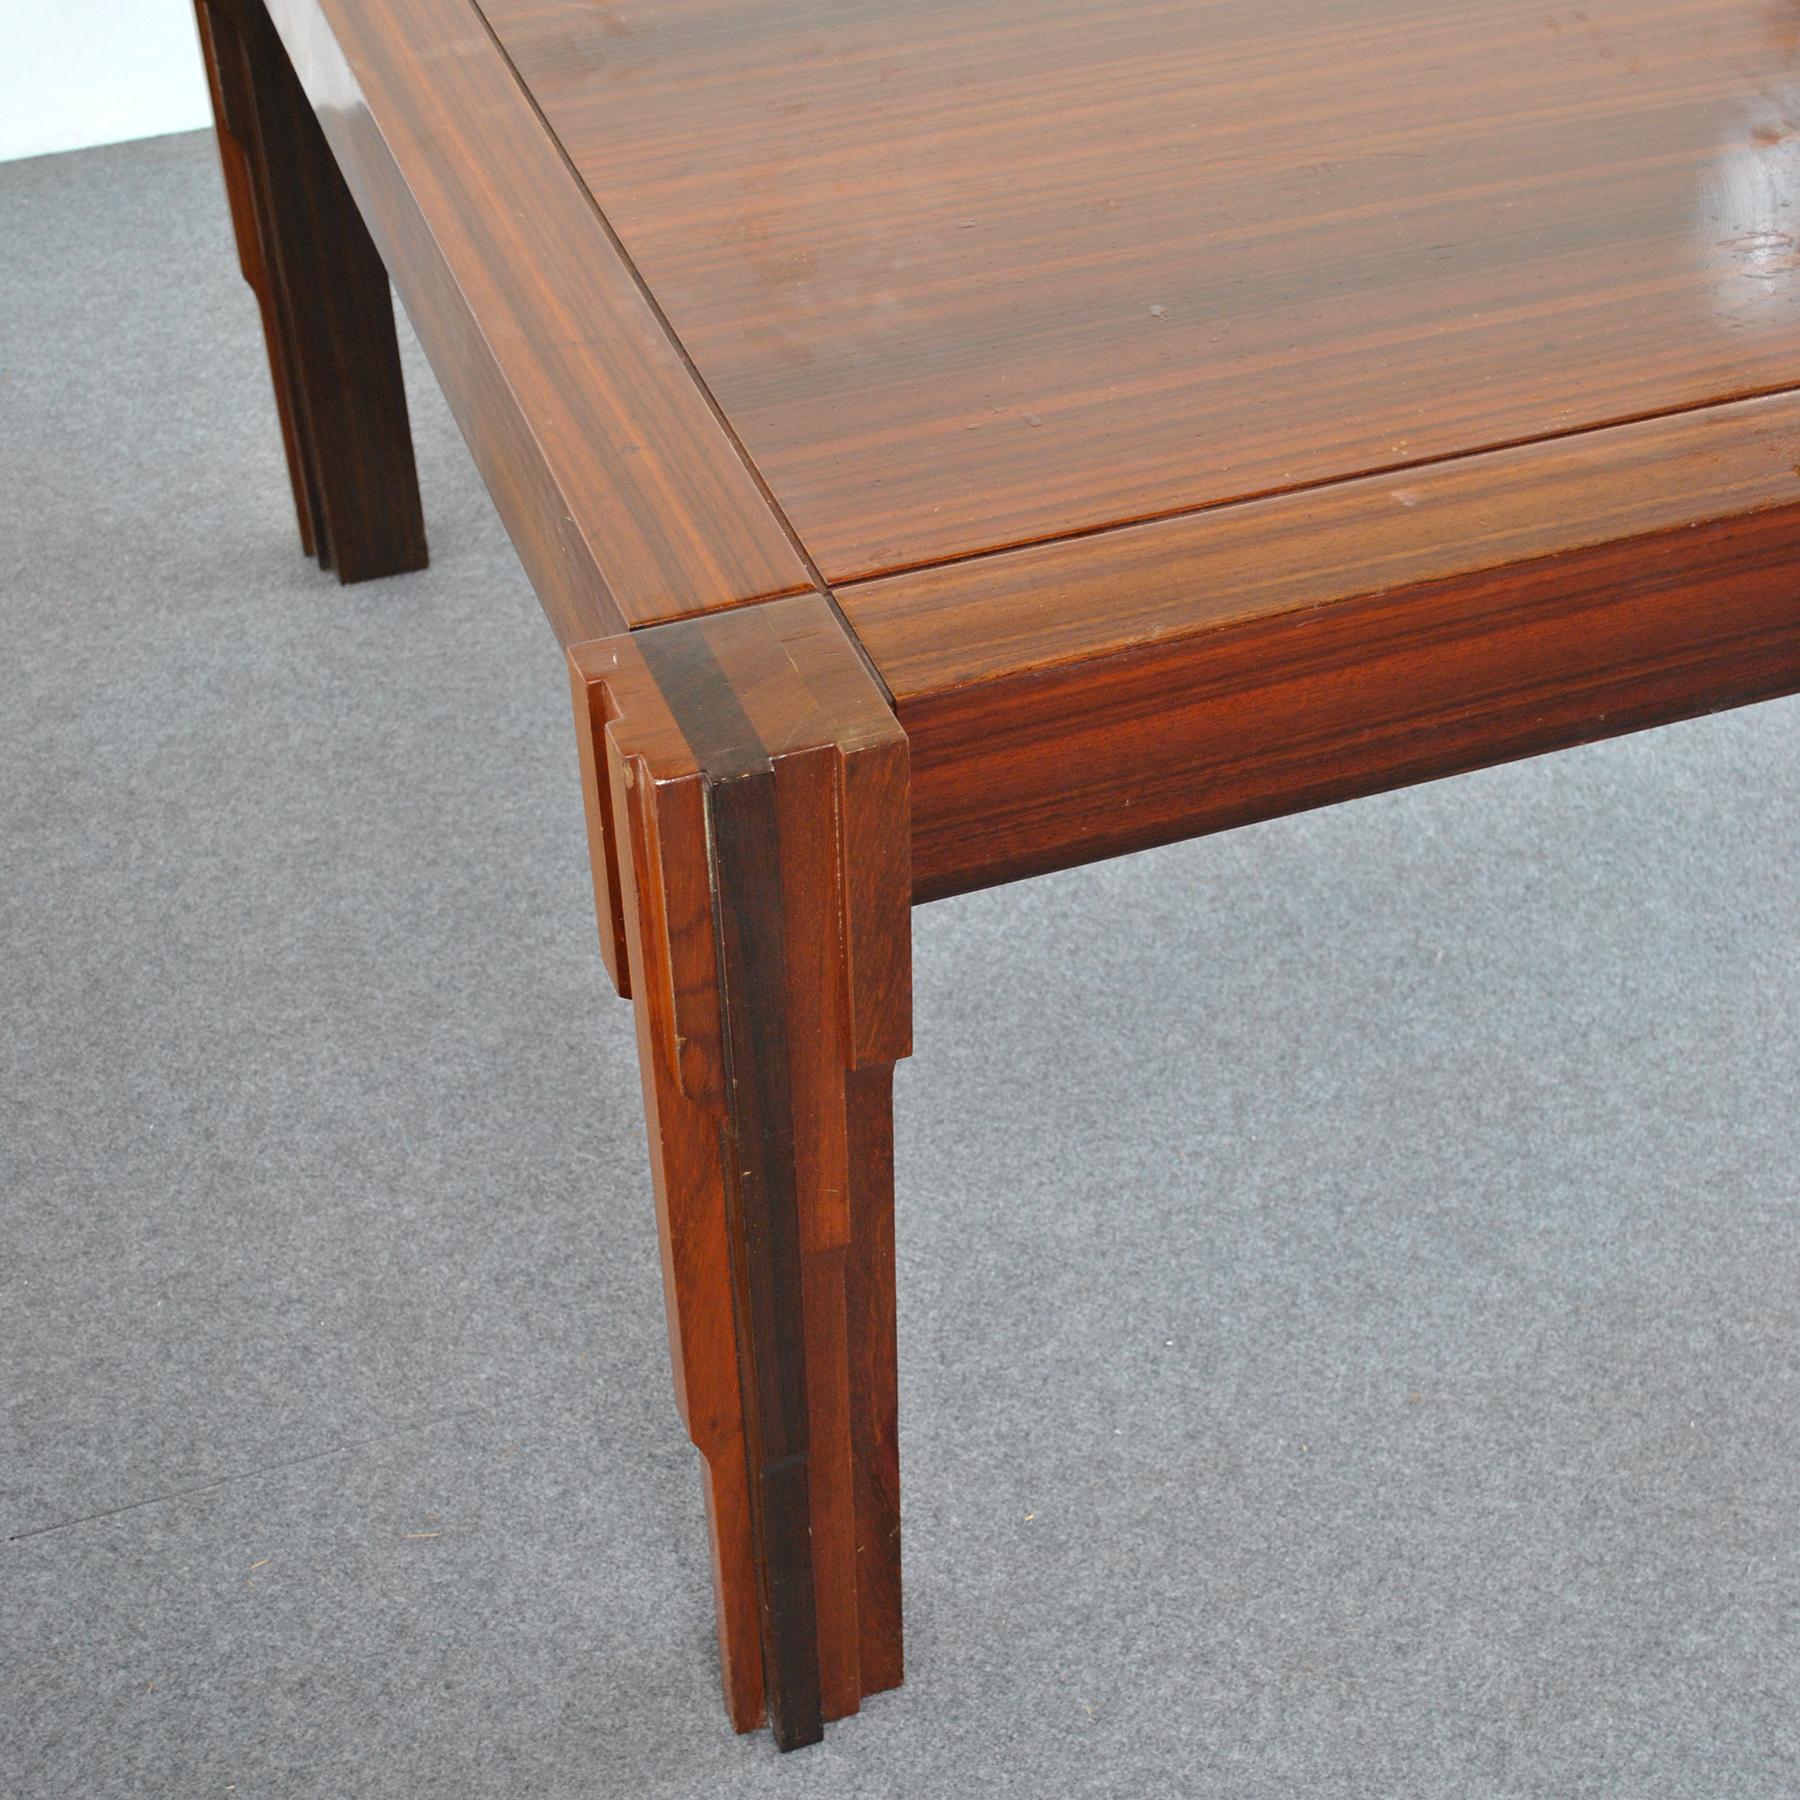 Wood Luciano Frigerio Italian Midcentury Table Early 70's For Sale